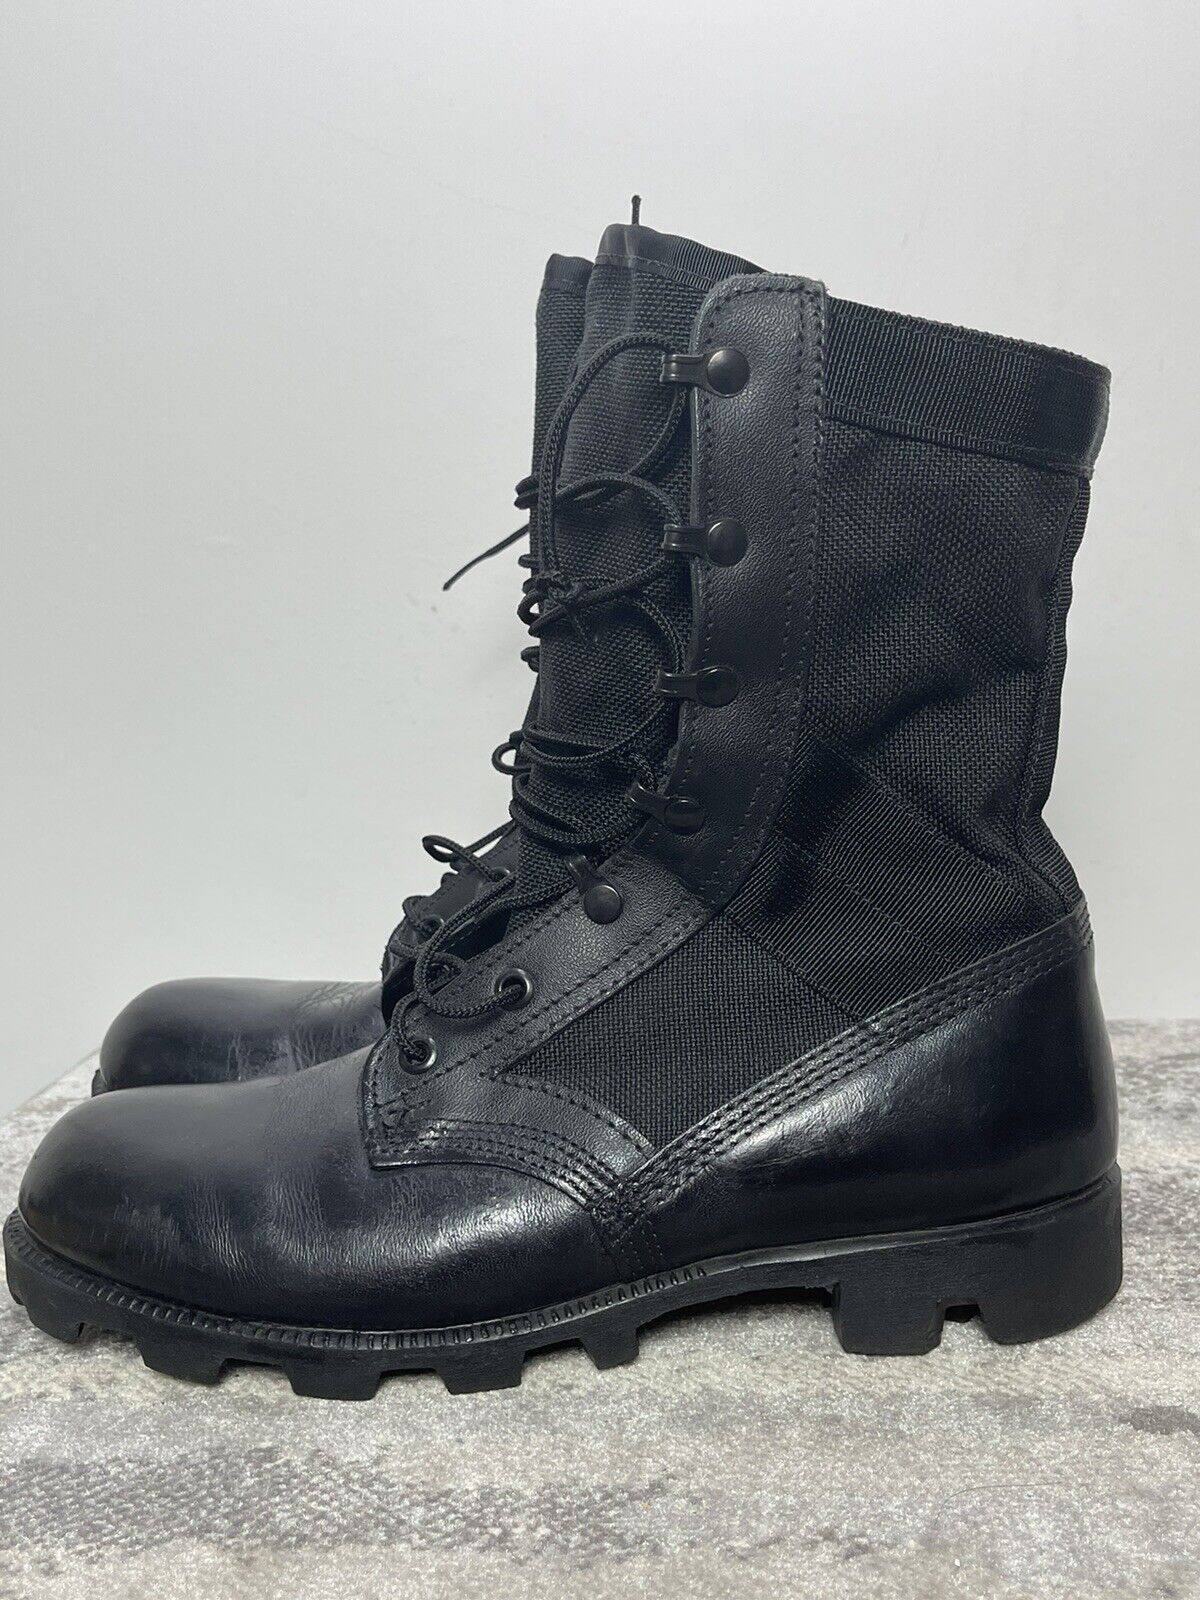 Wellco USA Military Black Leather Combat Infantry Boots Size 8R